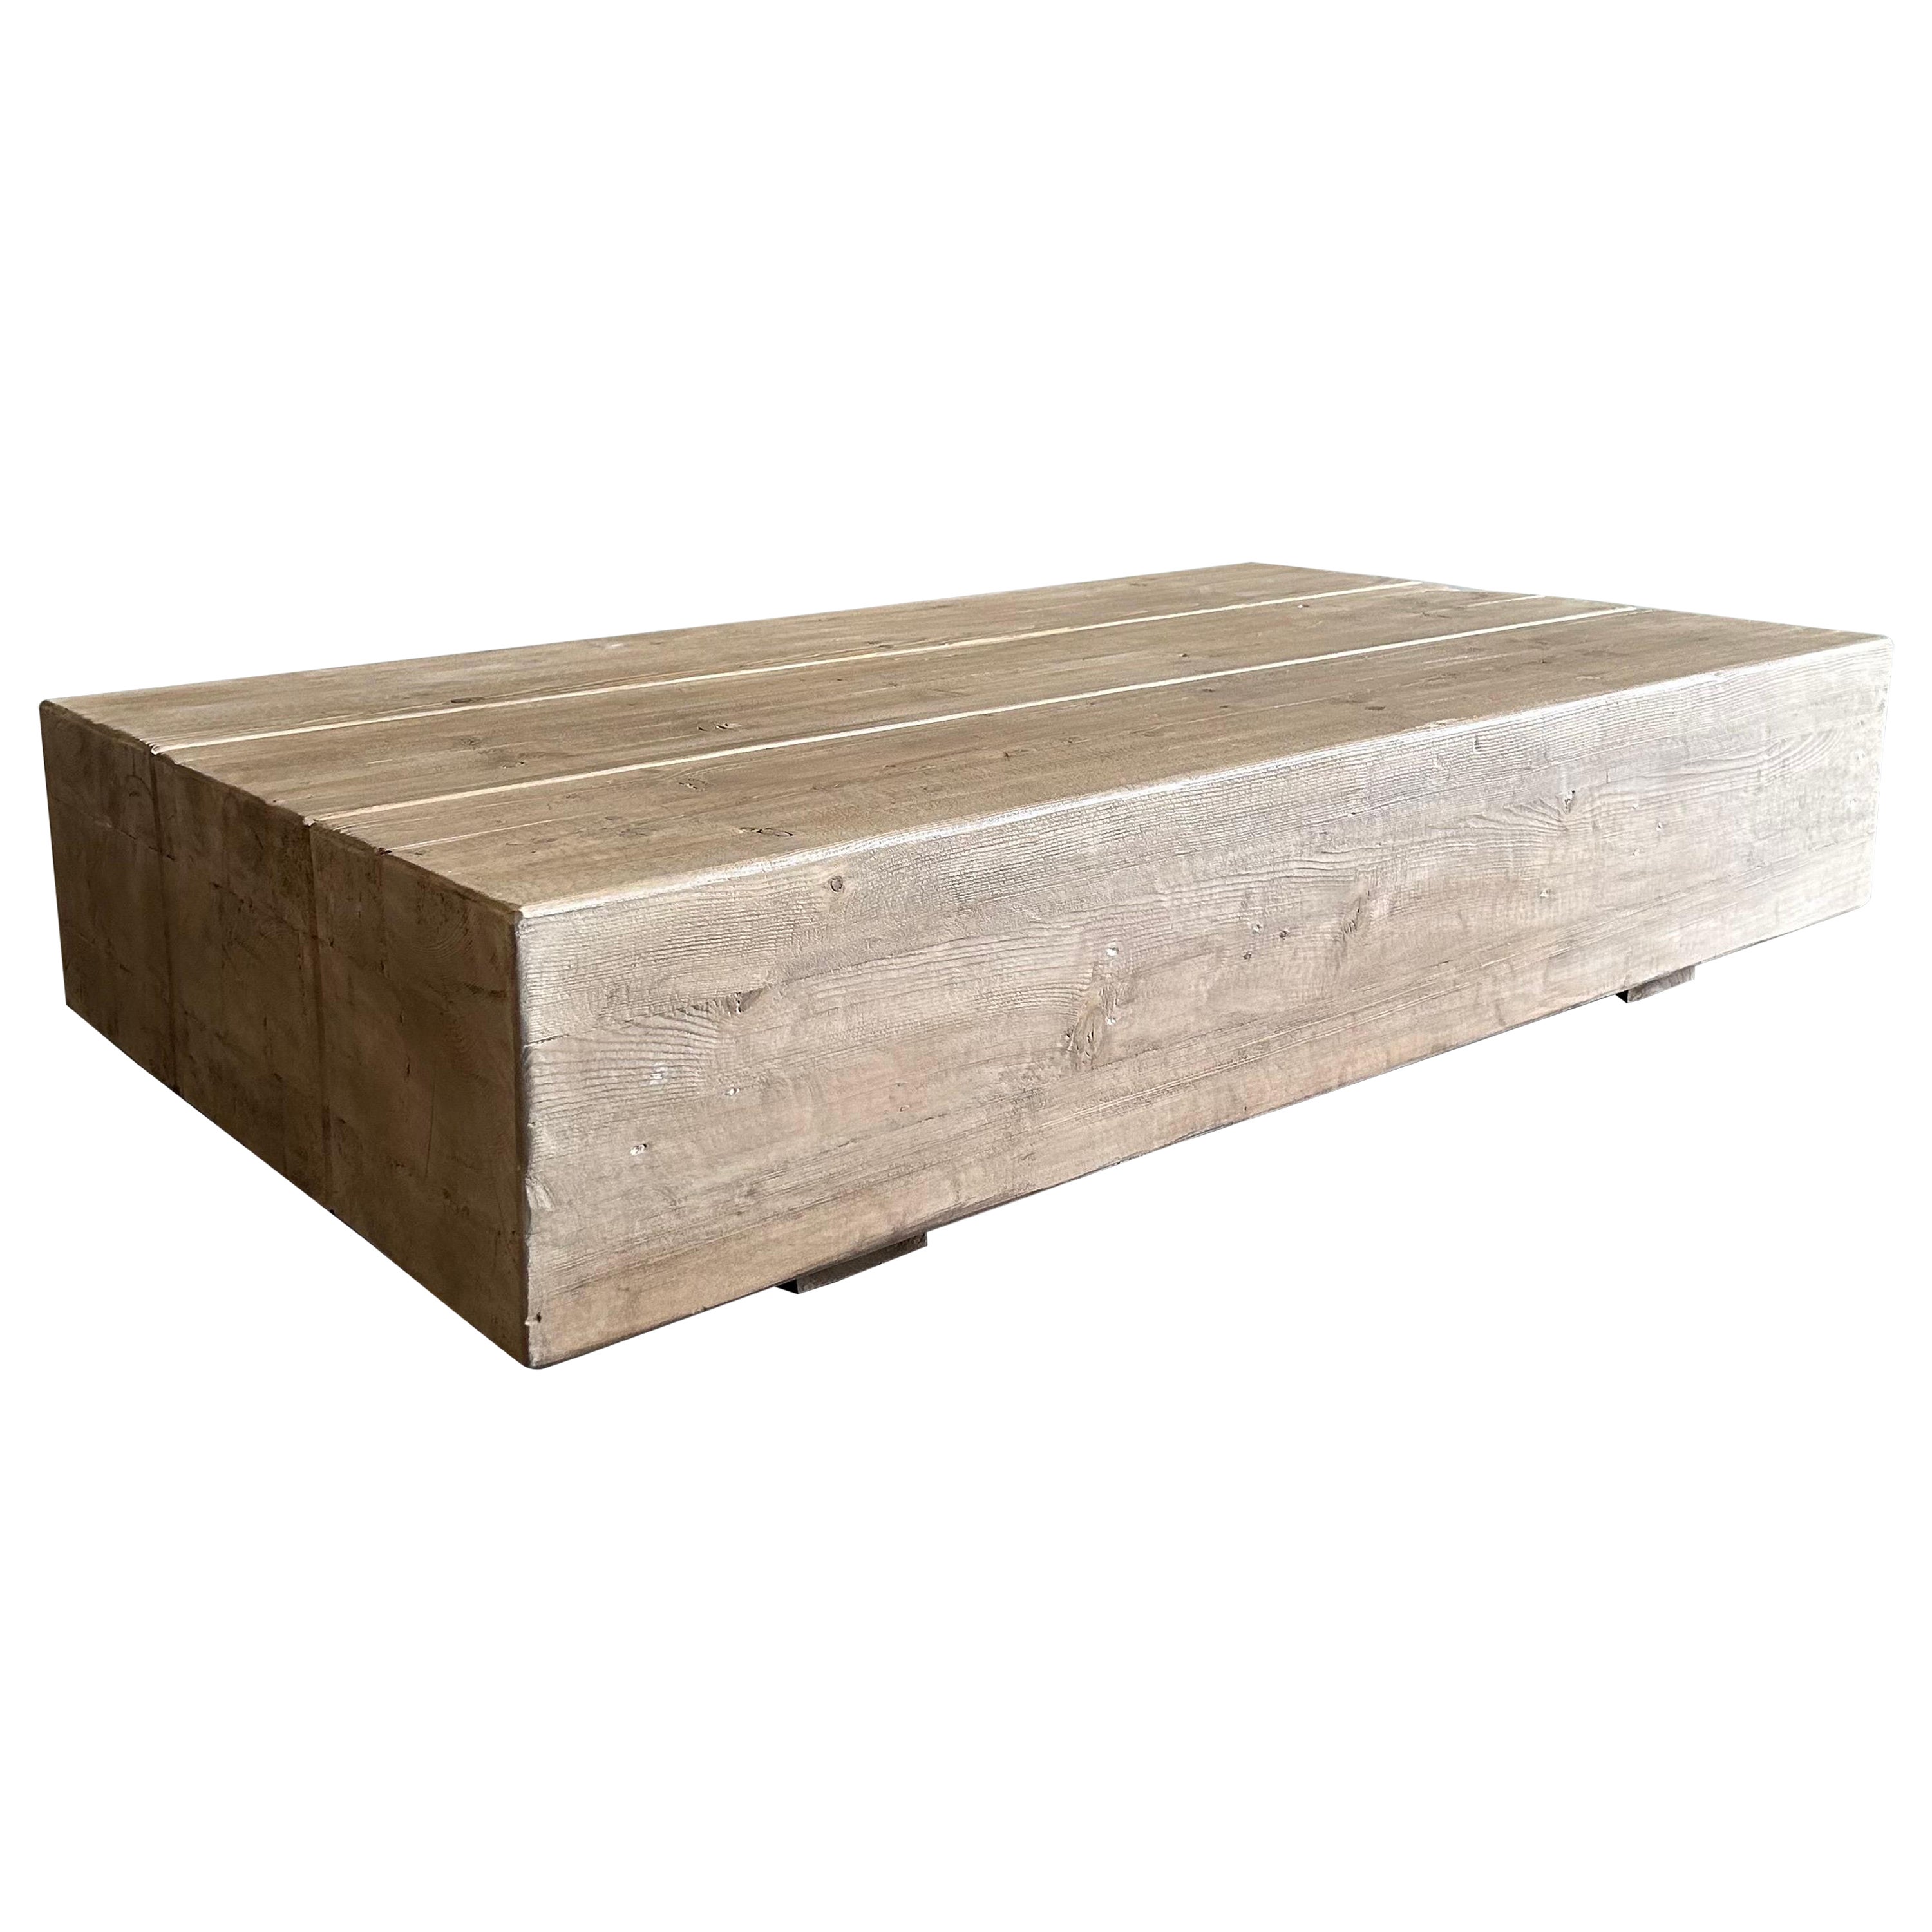 One of a kind Reclaimed Elm Wood Beam Coffee Table 